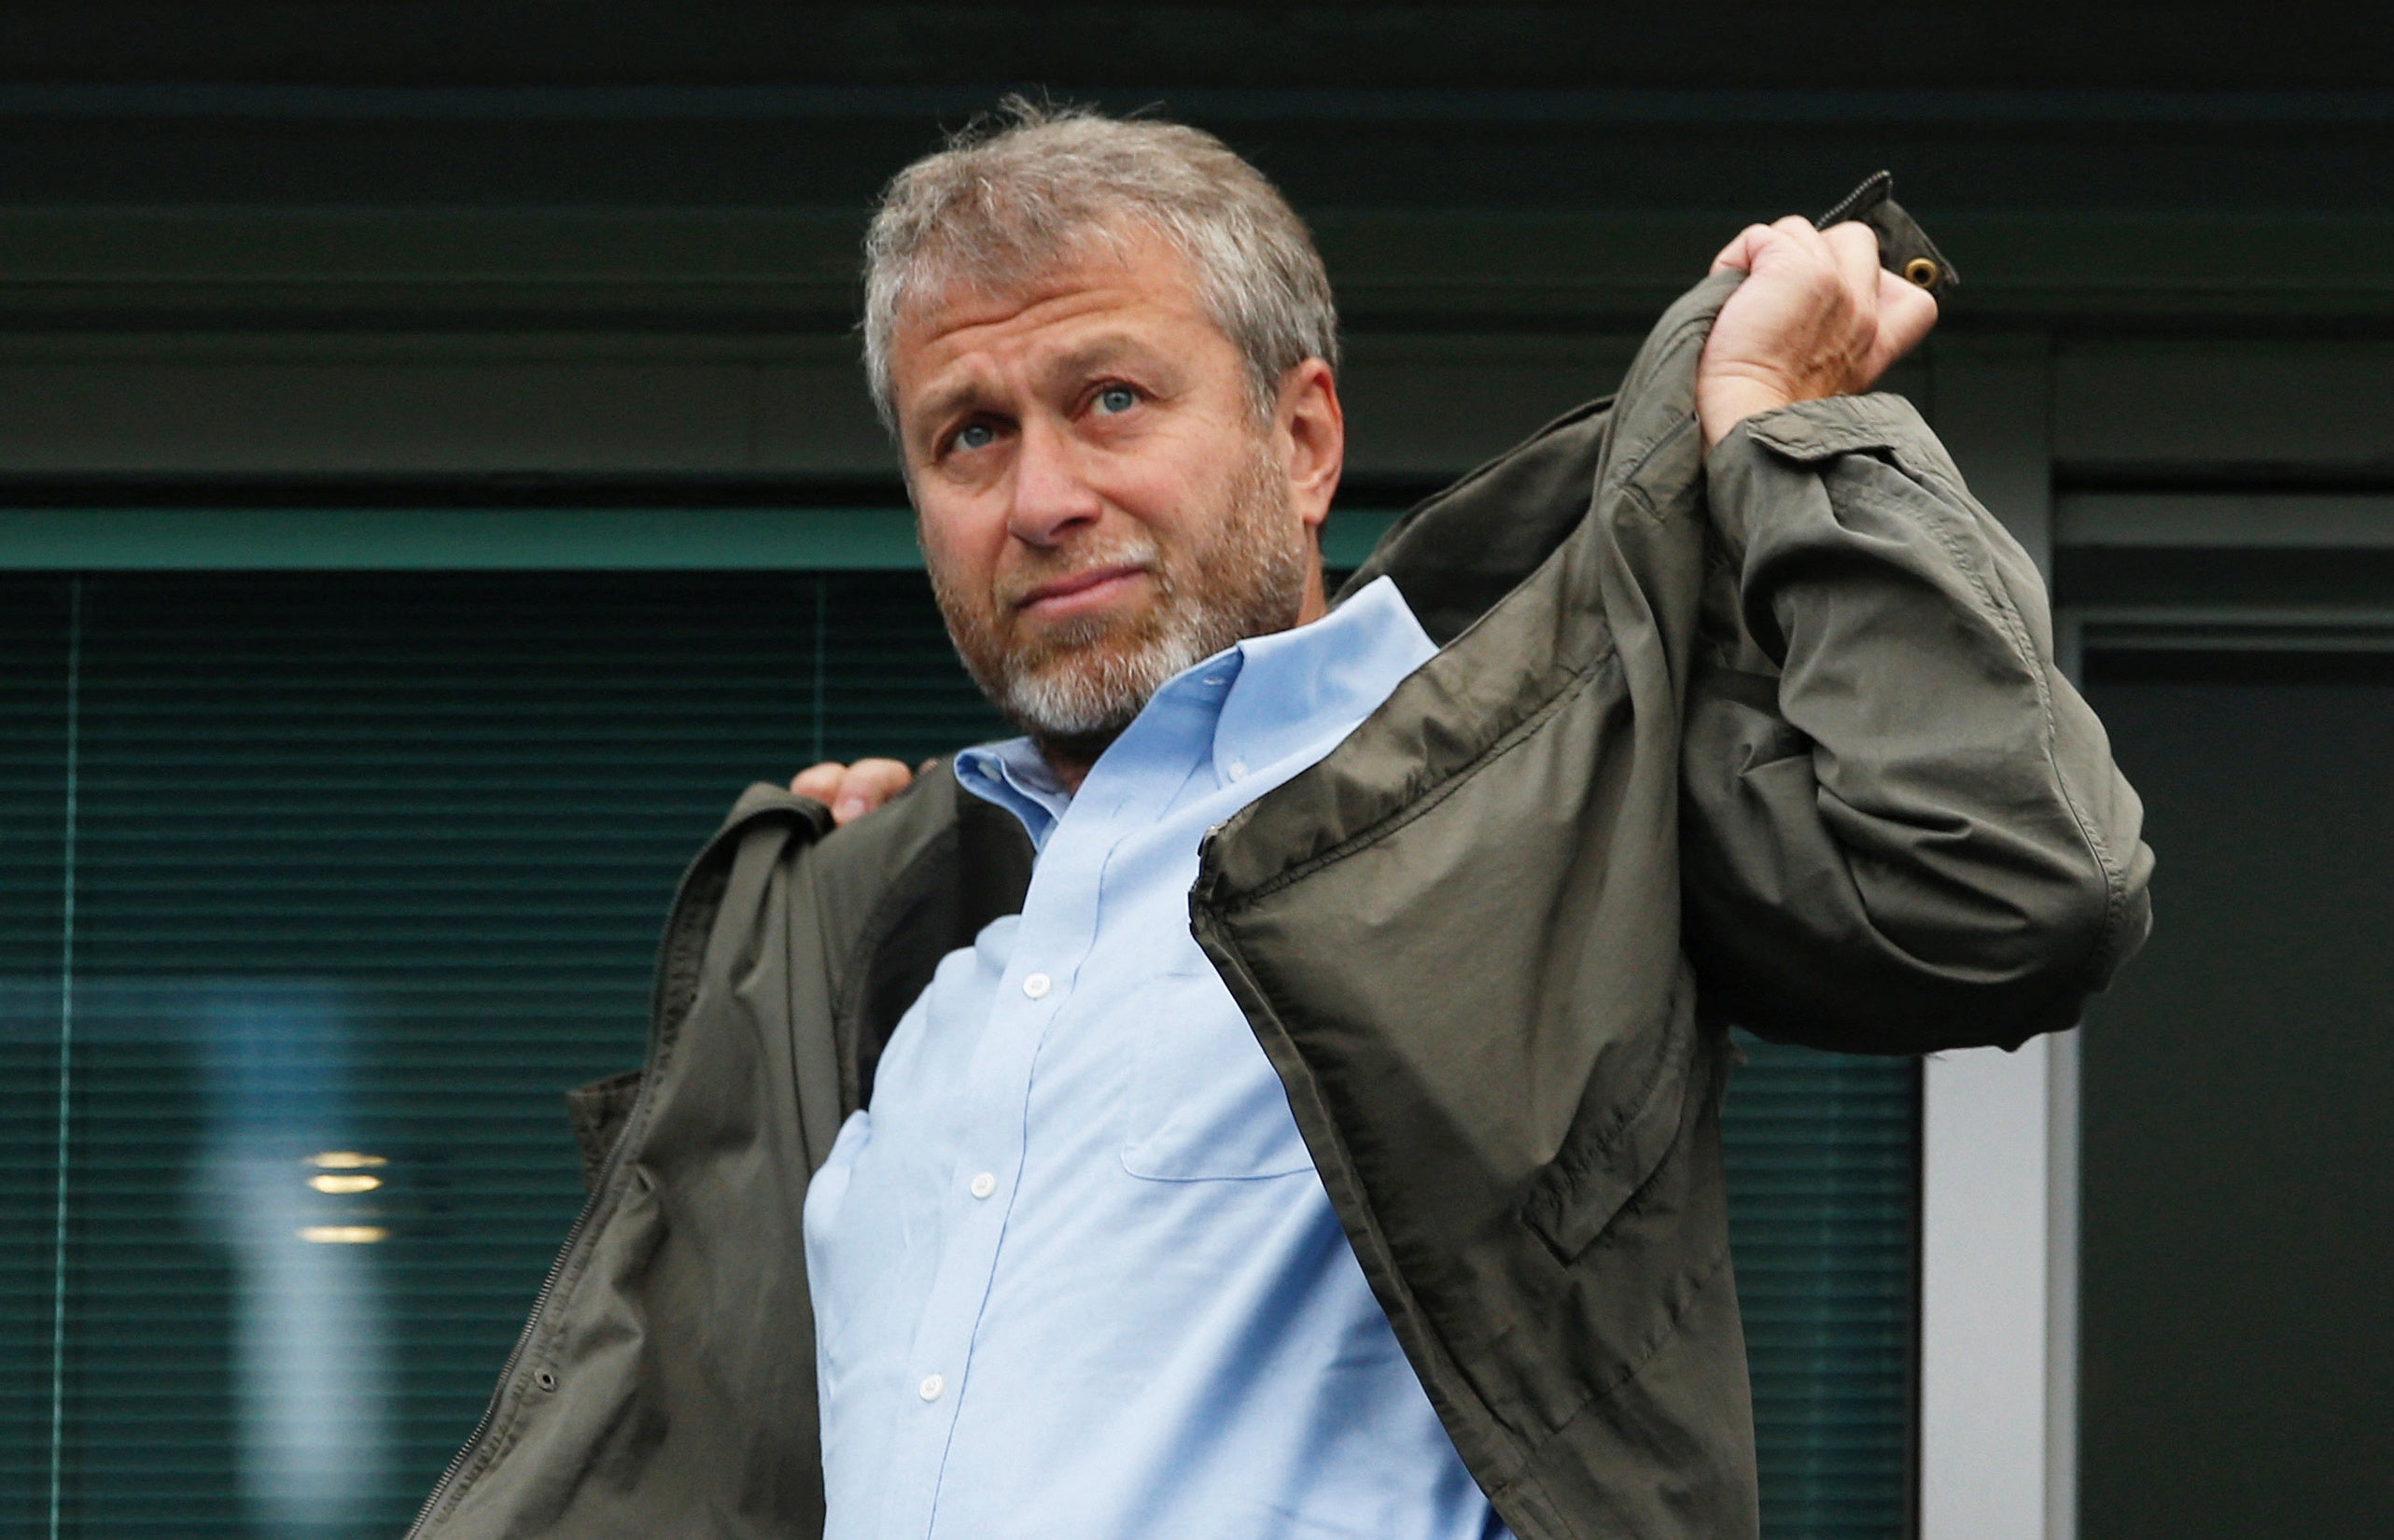 Roman Abramovich’s exit should spark football into asking some tough questions